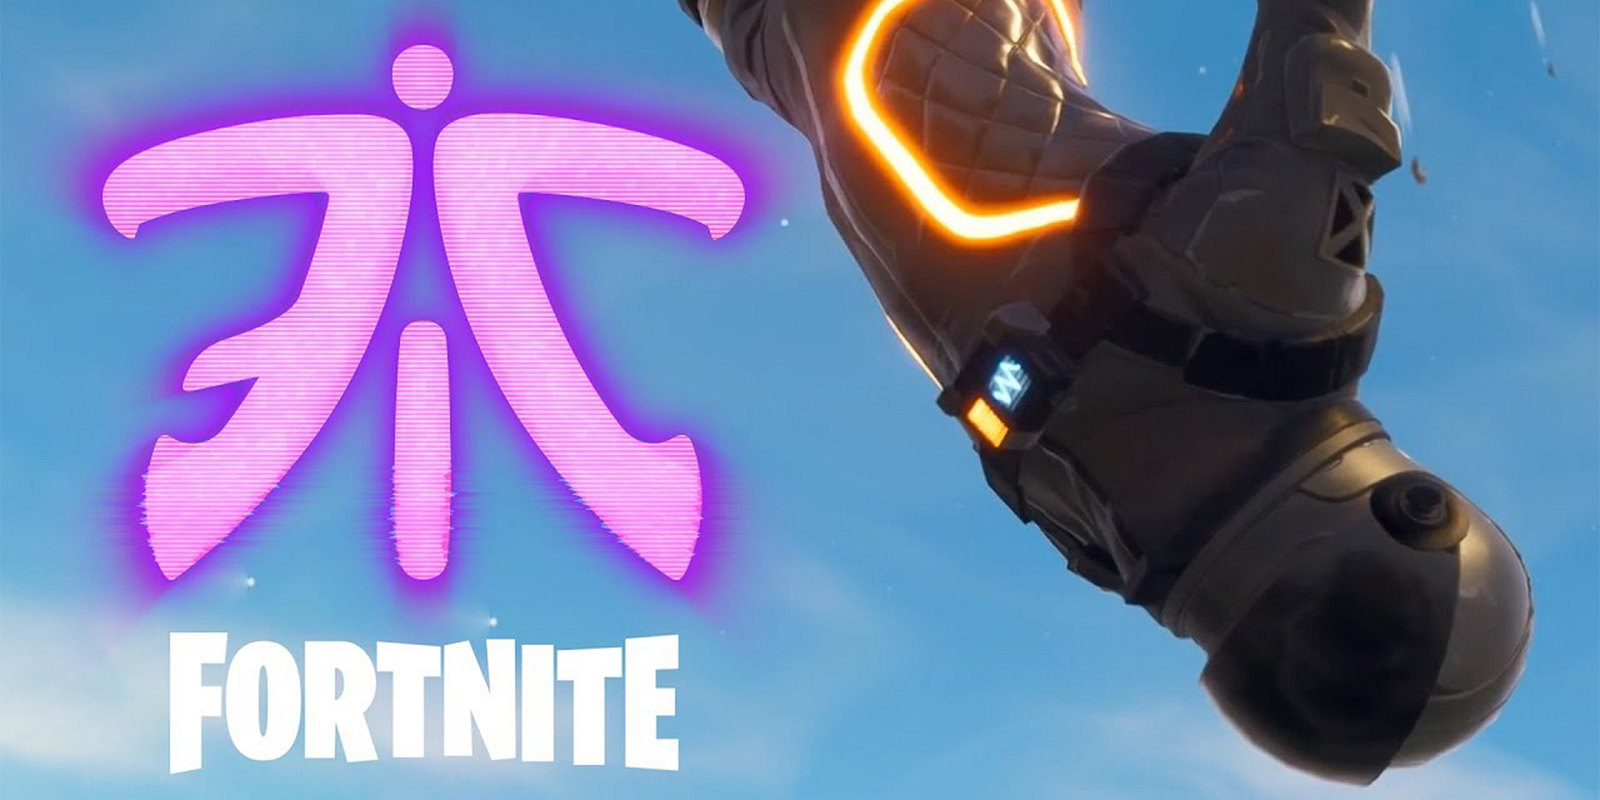 Creating The Competitive Fortnite Scene The First Skirmish Part 2 - 